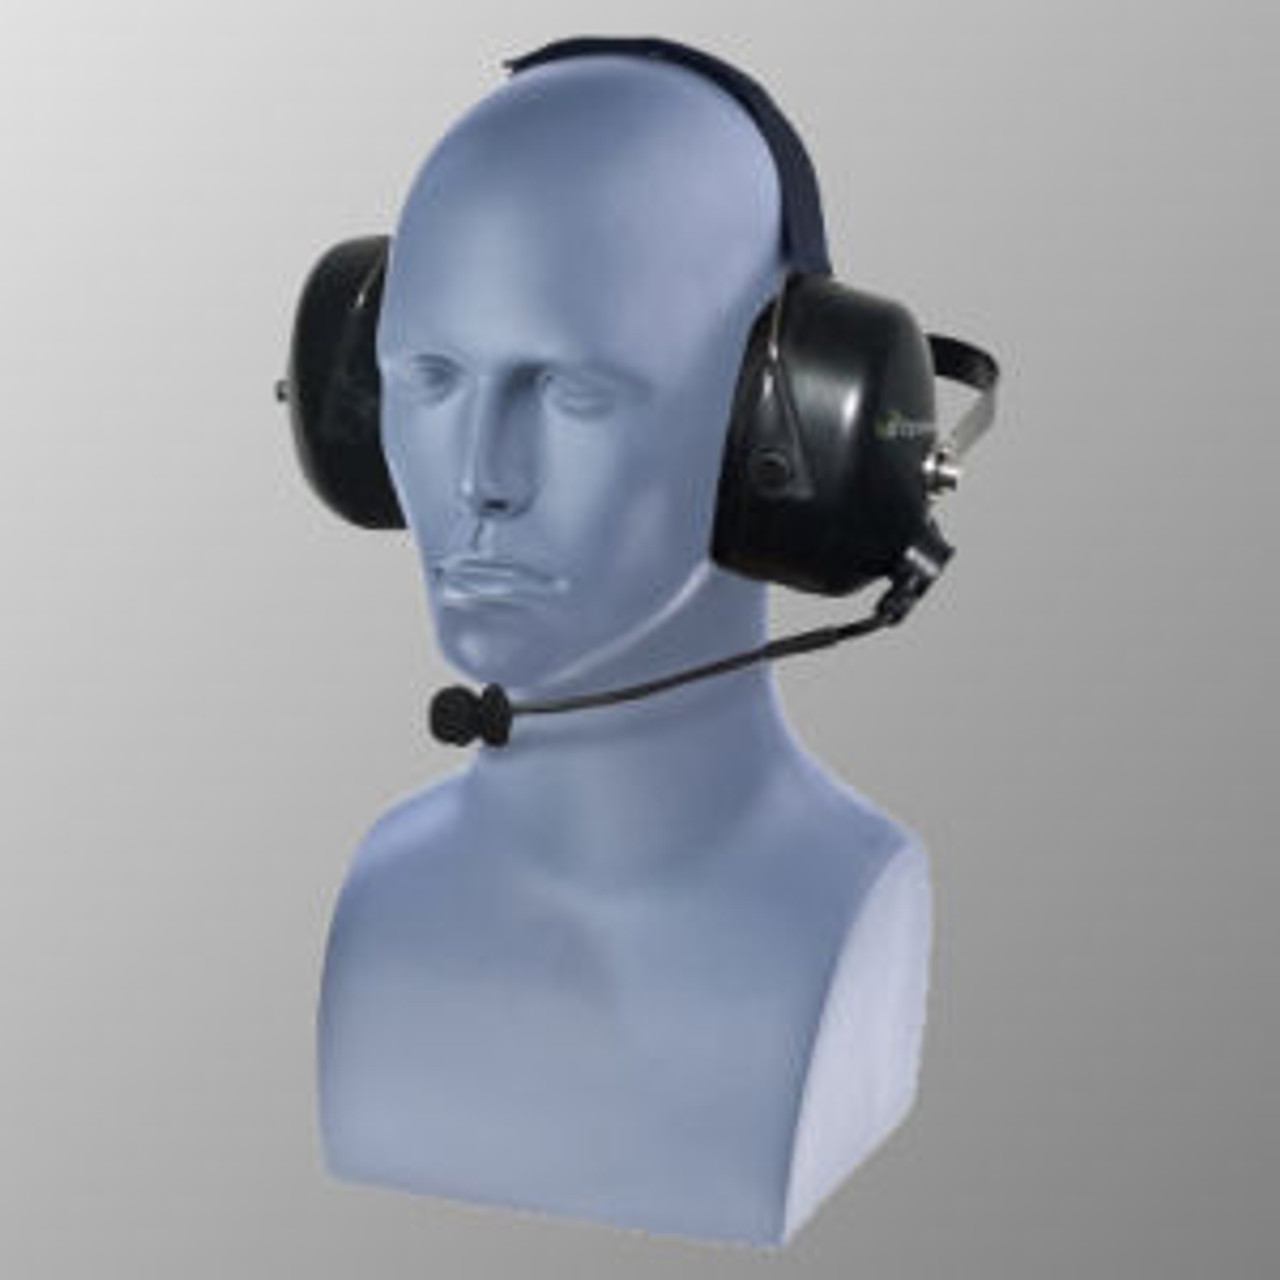 ICOM IC-F41GS Noise Canceling Double Muff Behind The Head Headset